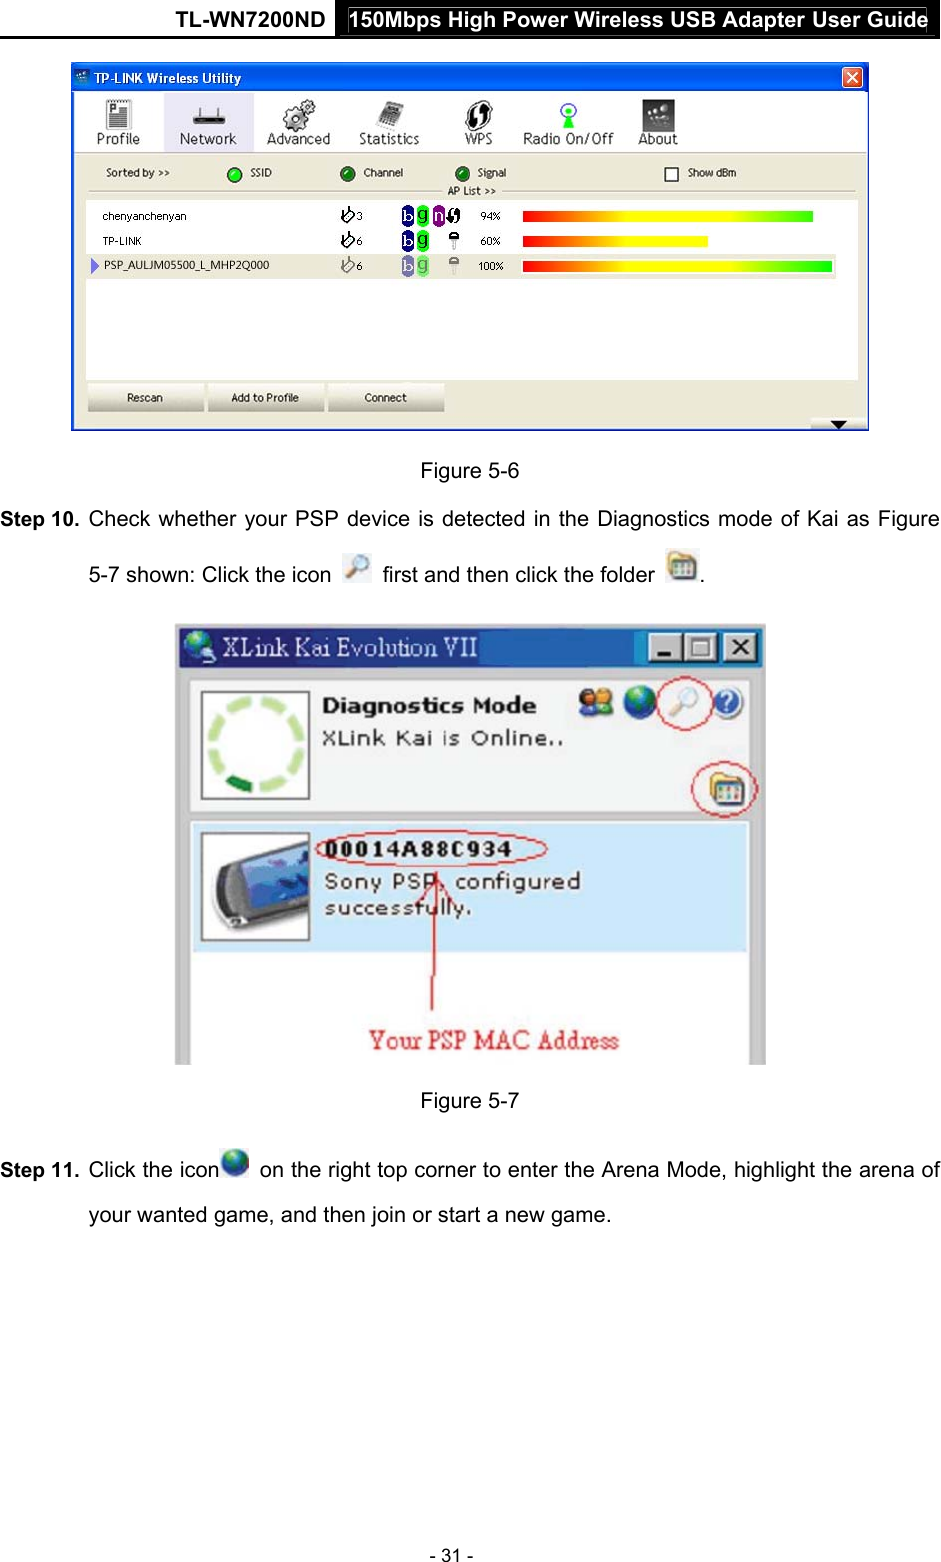 150Mbps High Power Wireless USB Adapter User GuideTL-WN7200ND  - 31 -  Figure 5-6 Step 10.  Check whether your PSP device is detected in the Diagnostics mode of Kai as Figure 5-7 shown: Click the icon    first and then click the folder  .  Figure 5-7 Step 11.  Click the icon   on the right top corner to enter the Arena Mode, highlight the arena of your wanted game, and then join or start a new game. 